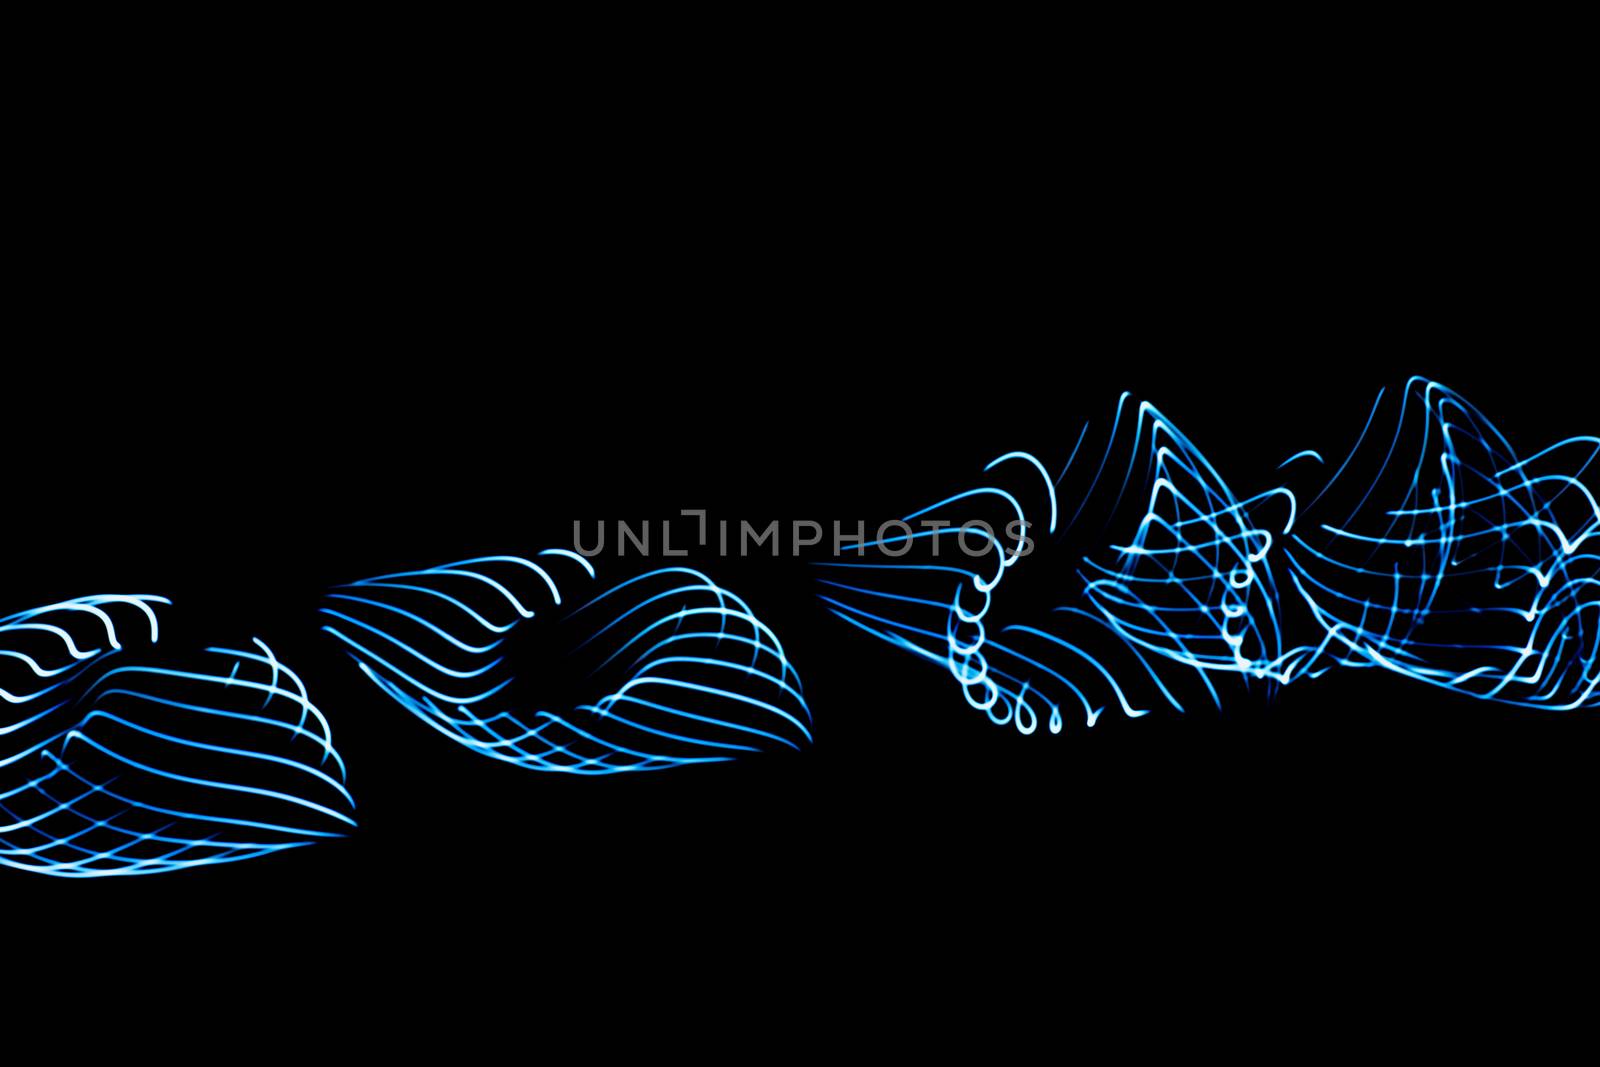 Sound waves in the visible blue color in the dark